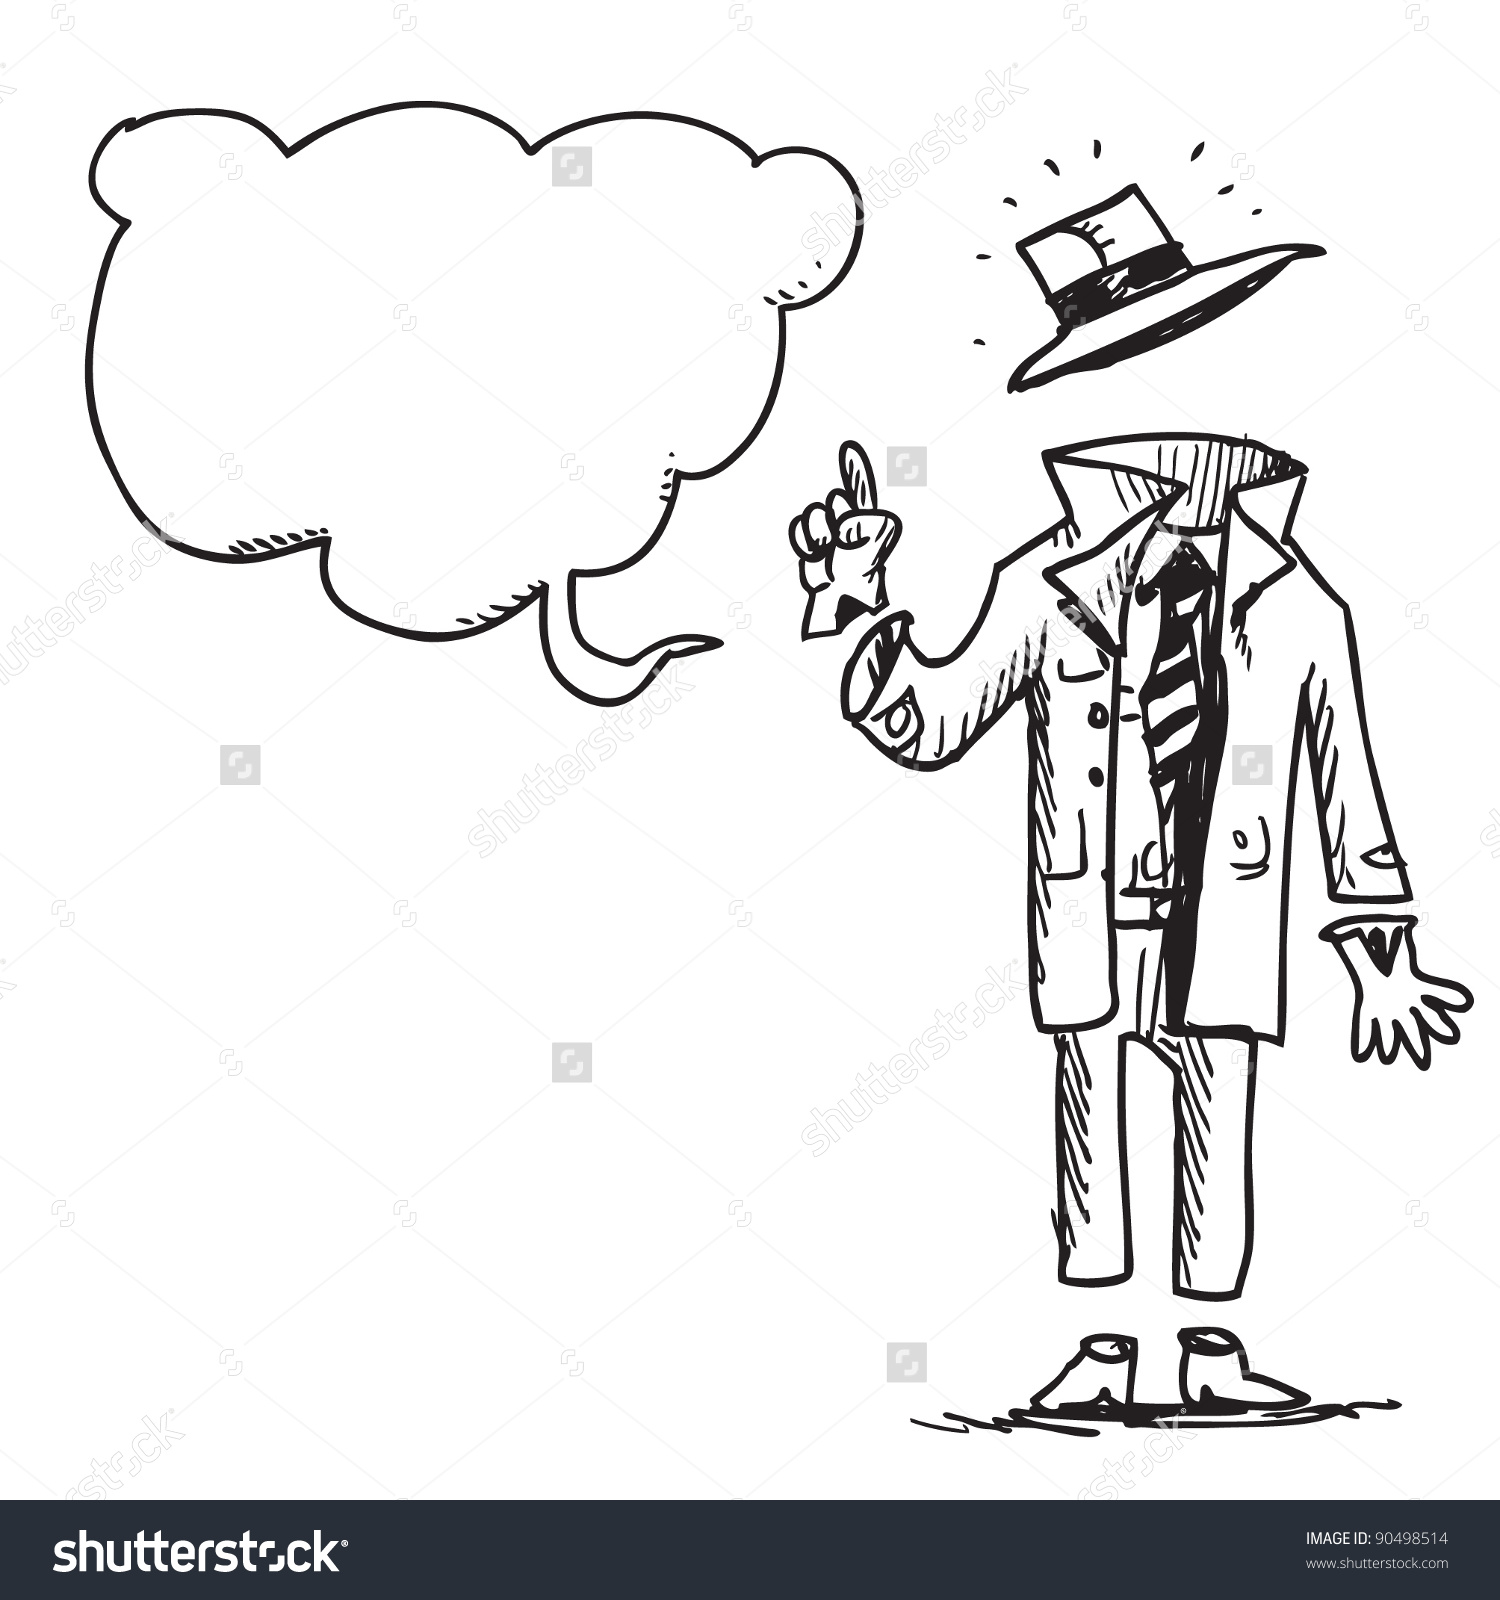 Invisible man clipart.